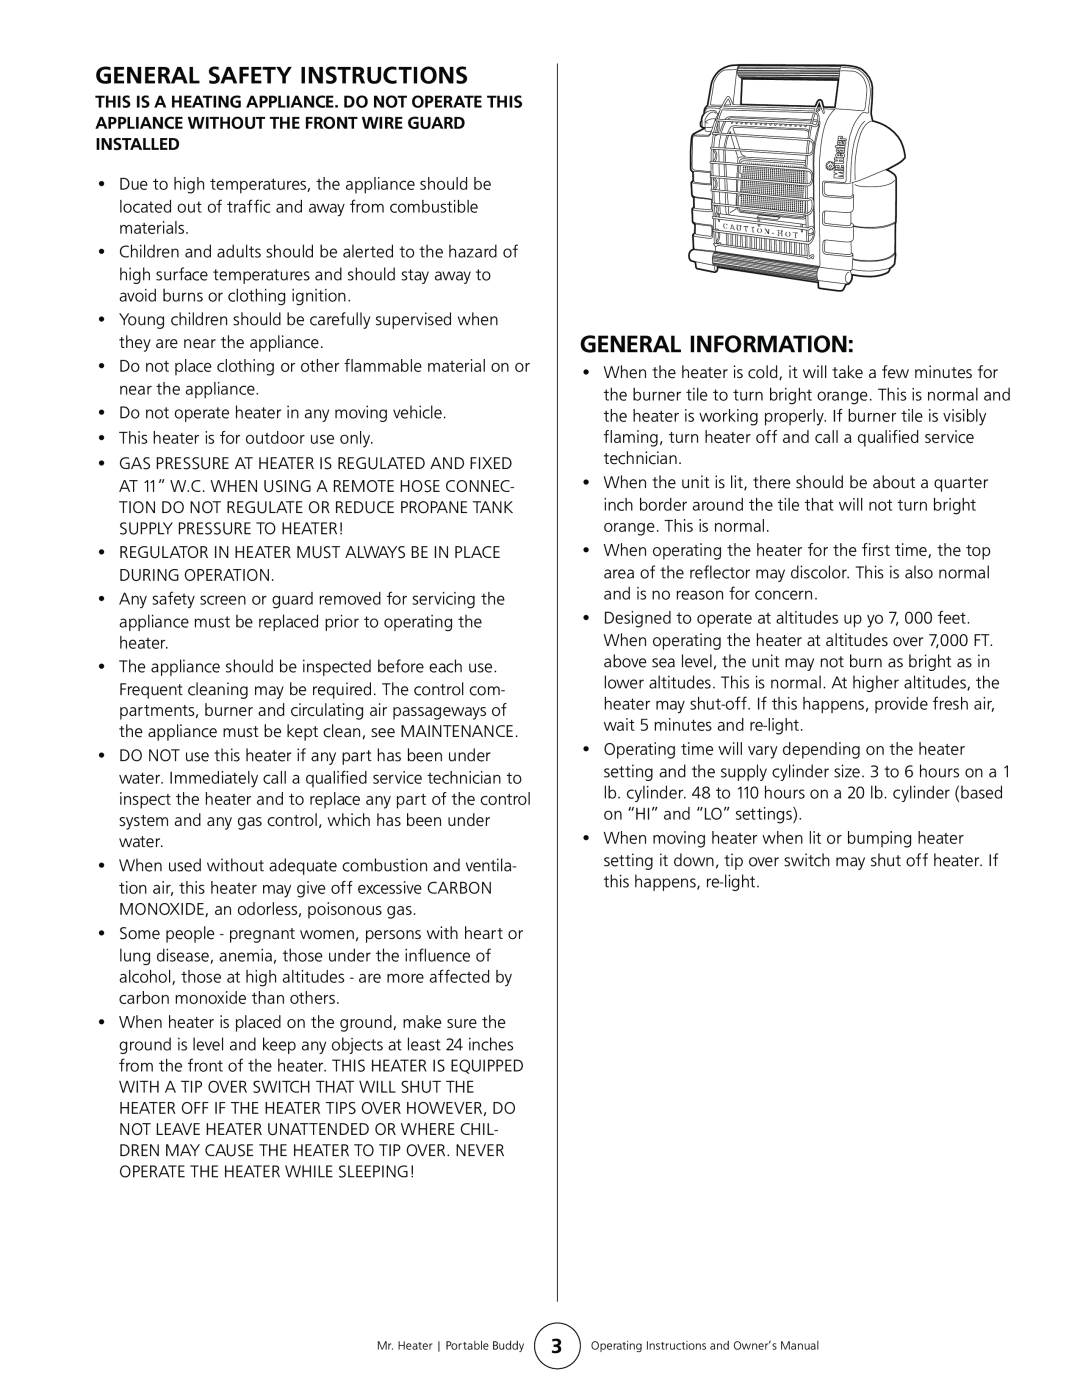 Mr. Heater MH9B owner manual General Safety Instructions, General Information 